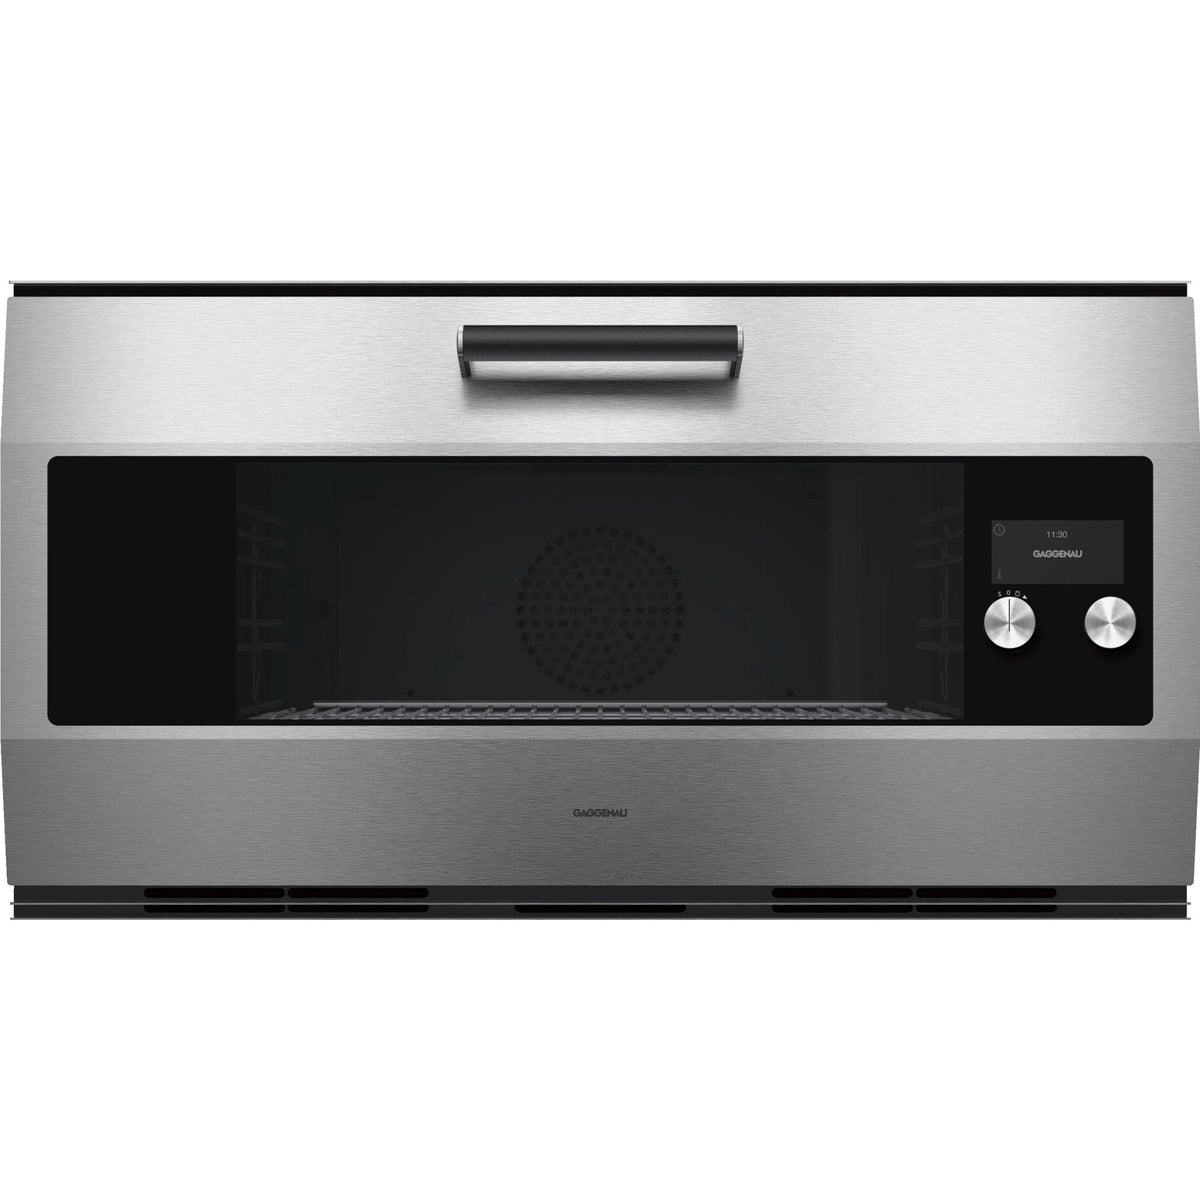 Gaggenau 36-inch, 3.6 cu.ft. Built-in Single Wall Oven with Convection Technology EB333611 IMAGE 1